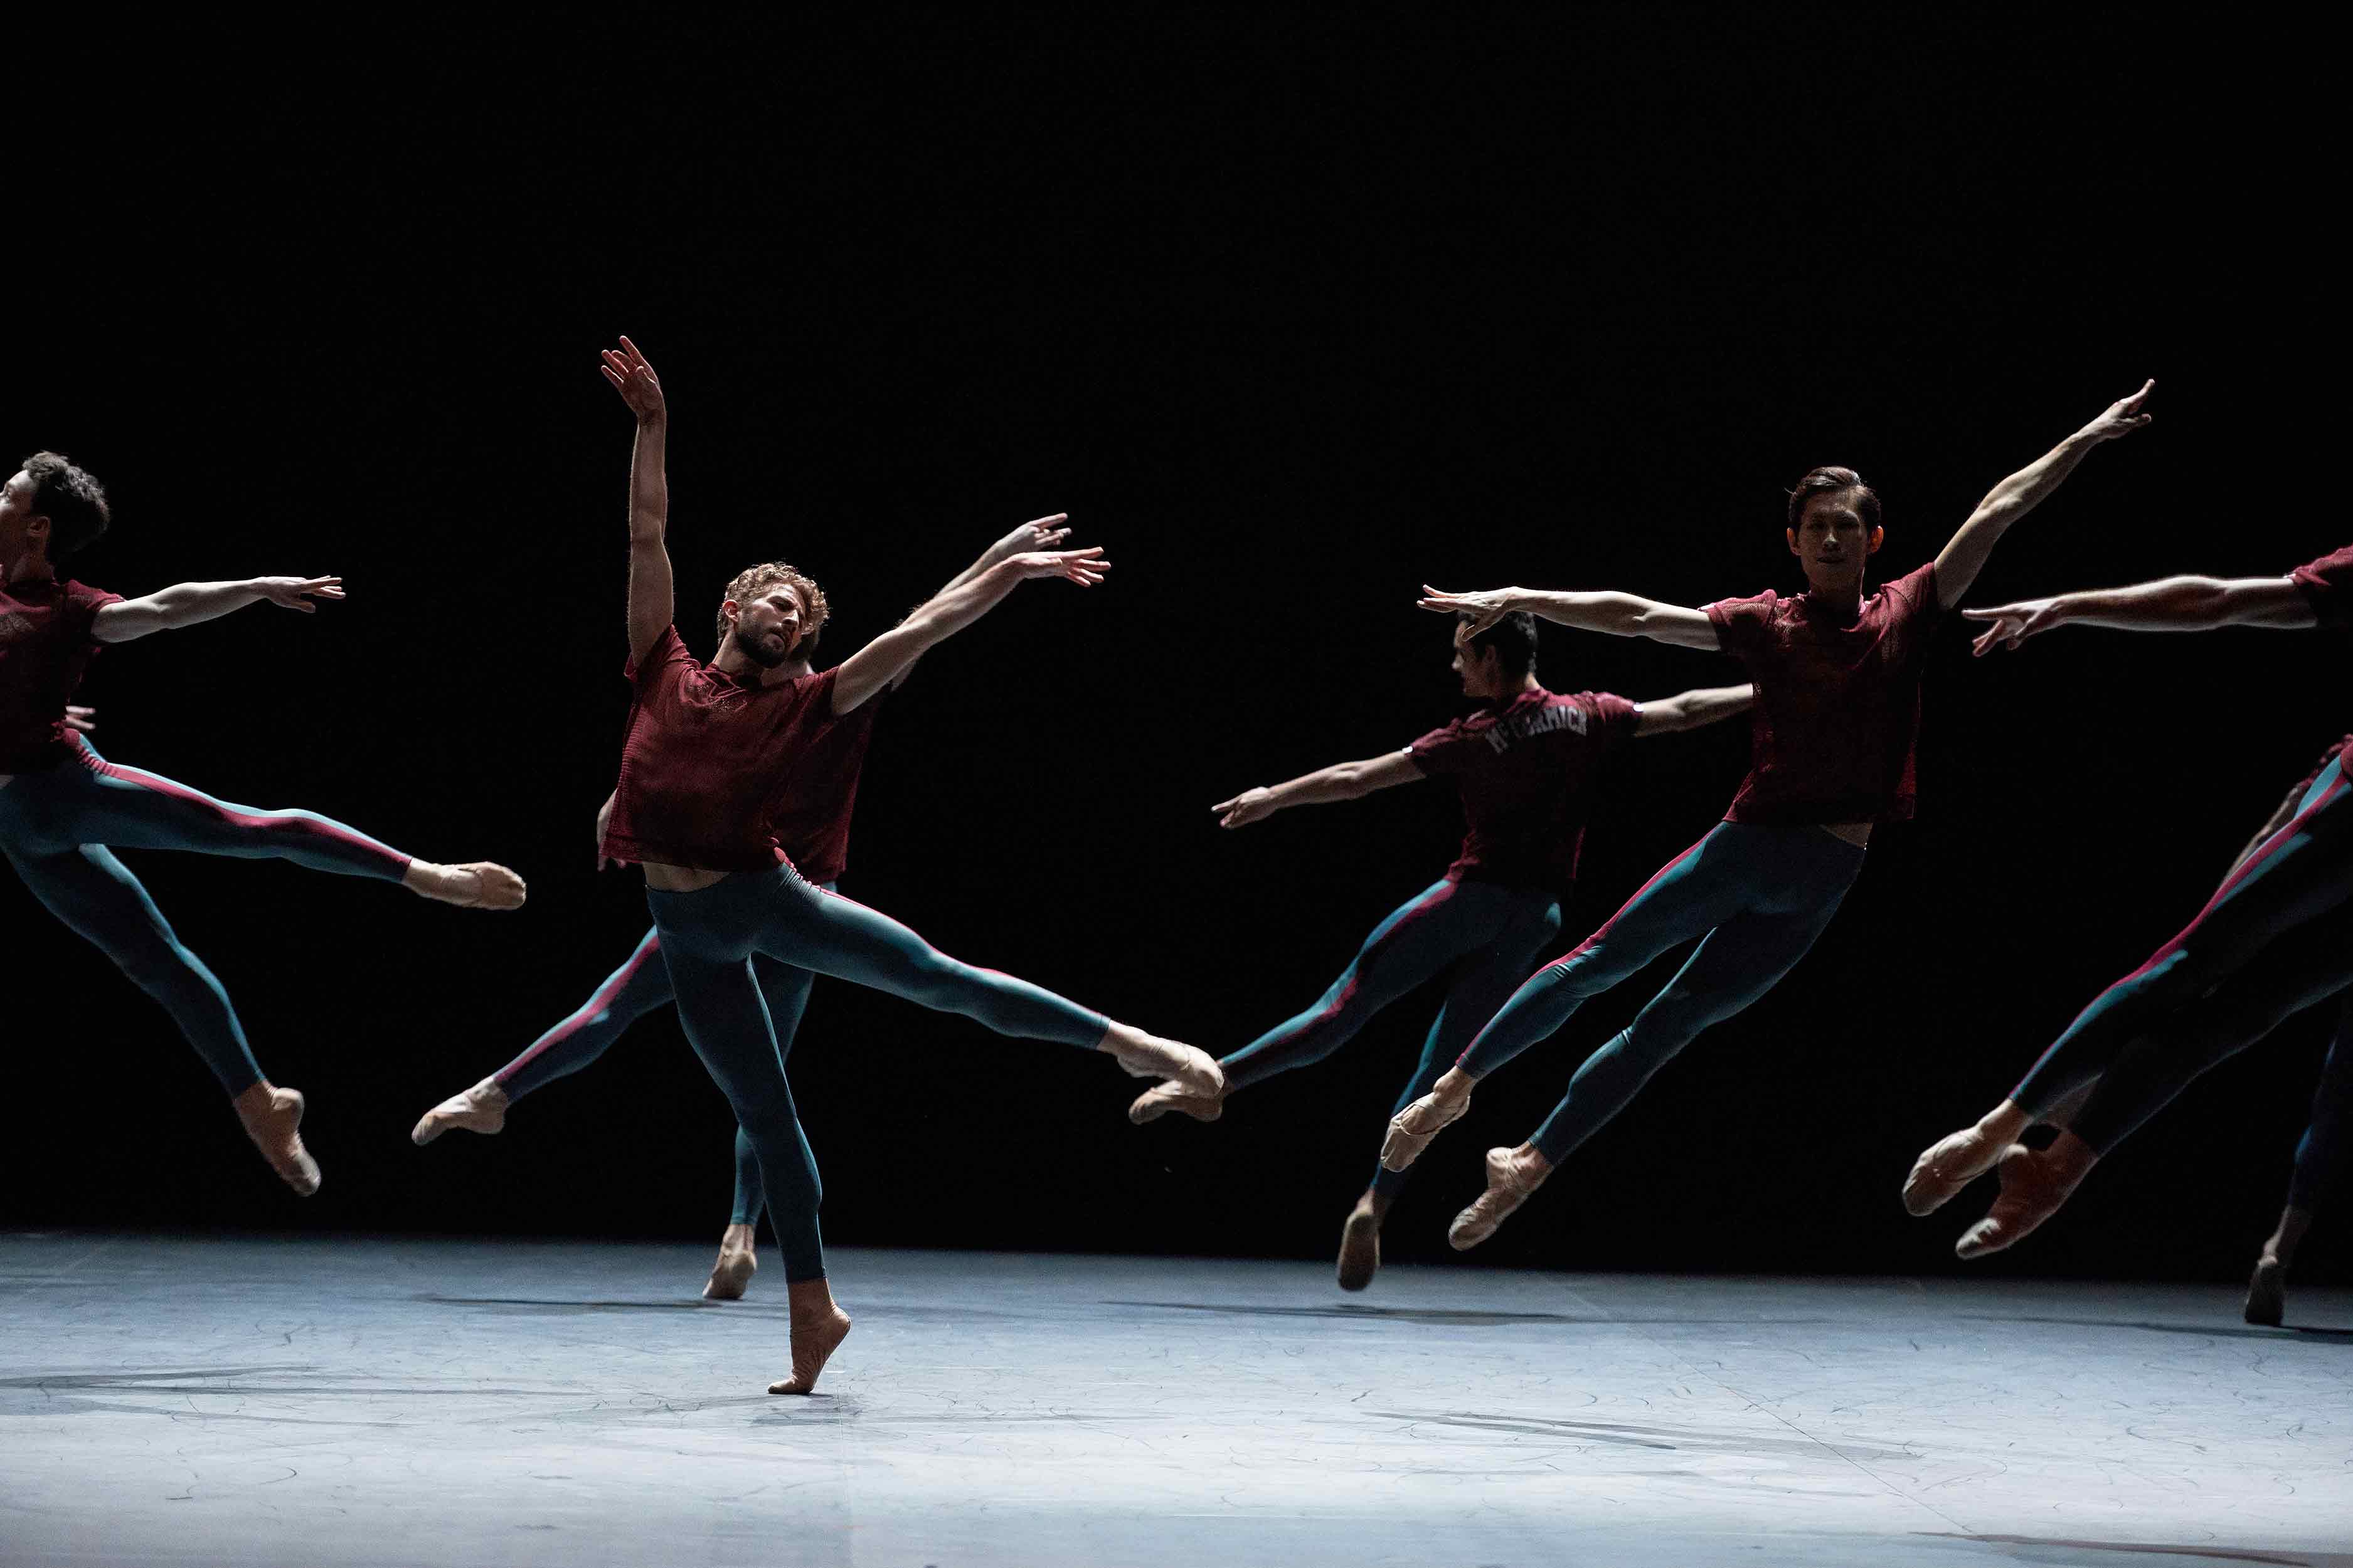 Giorgio-Garrett-and-English-National-Ballet-in-Playlist-(Track-1,2)-by-William-Forsythe